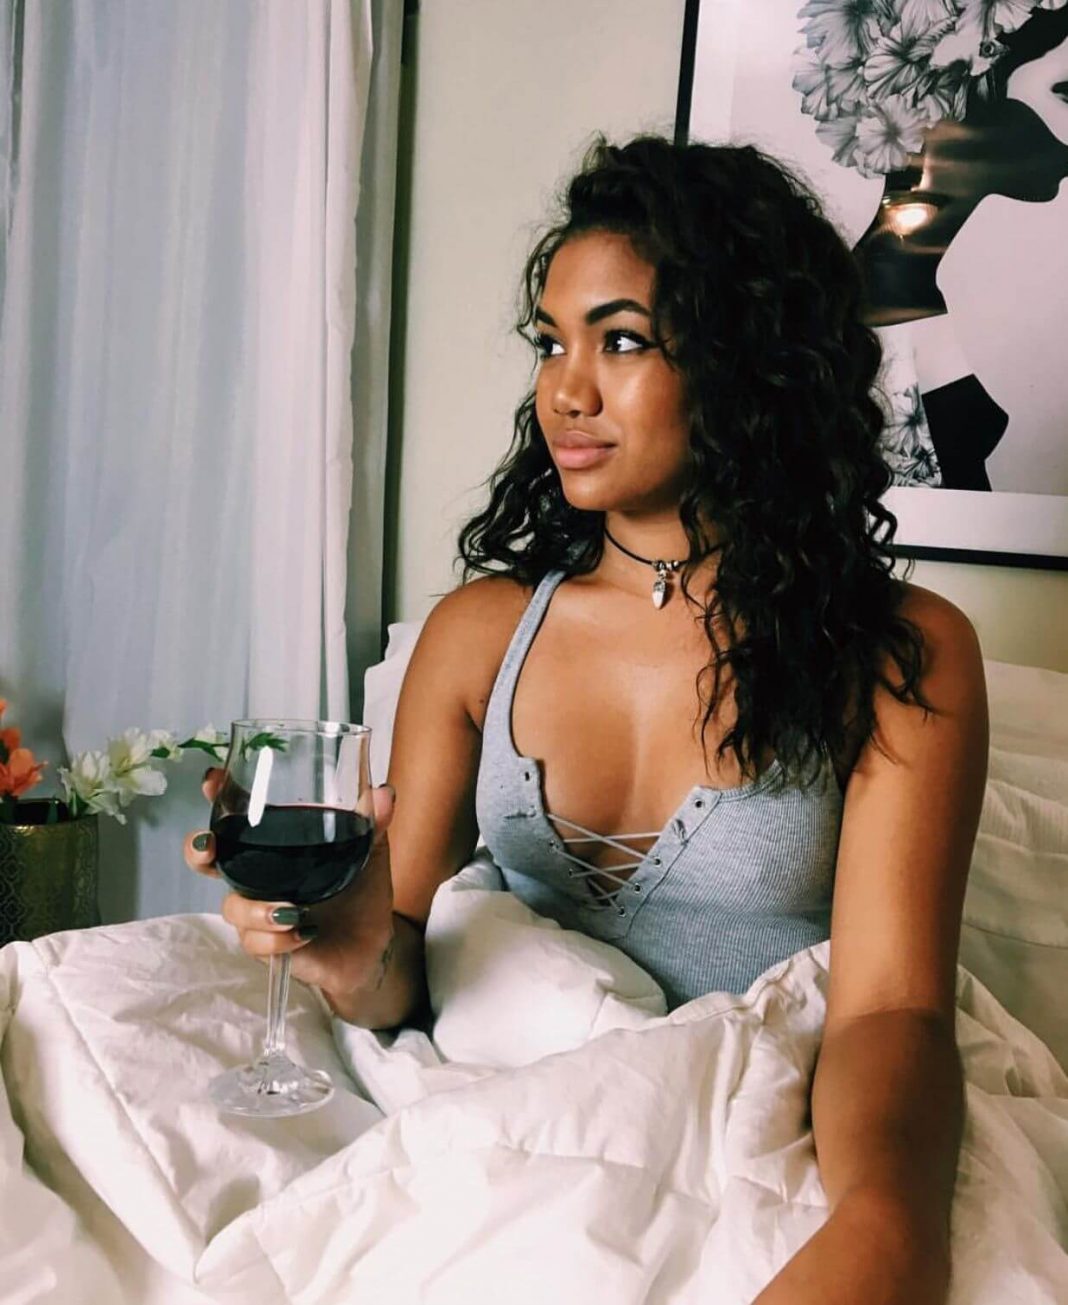 51 Paige Hurd Nude Pictures Which Makes Her An Enigmatic Glamor Quotient 224